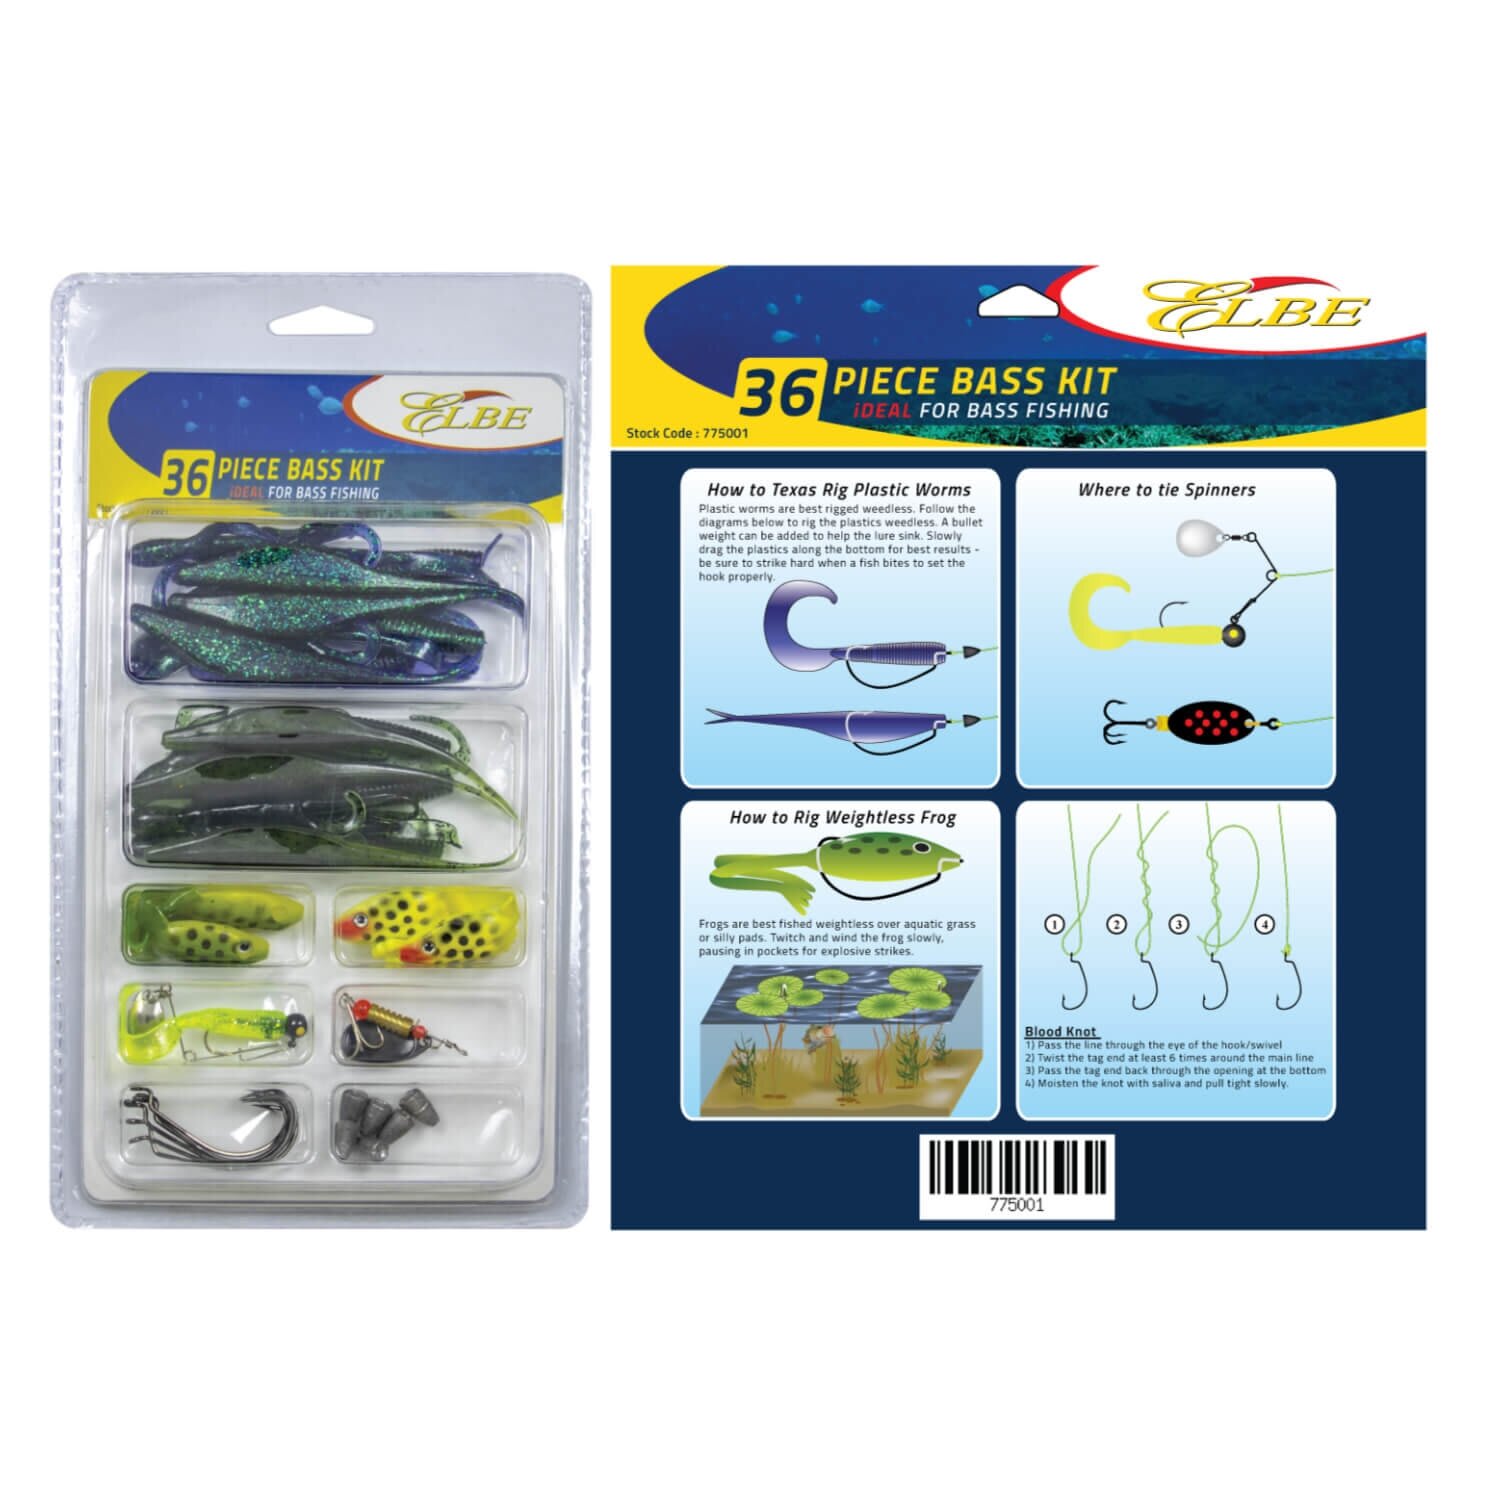 STARTER KIT BASS 36 PIECES – All Out Angling